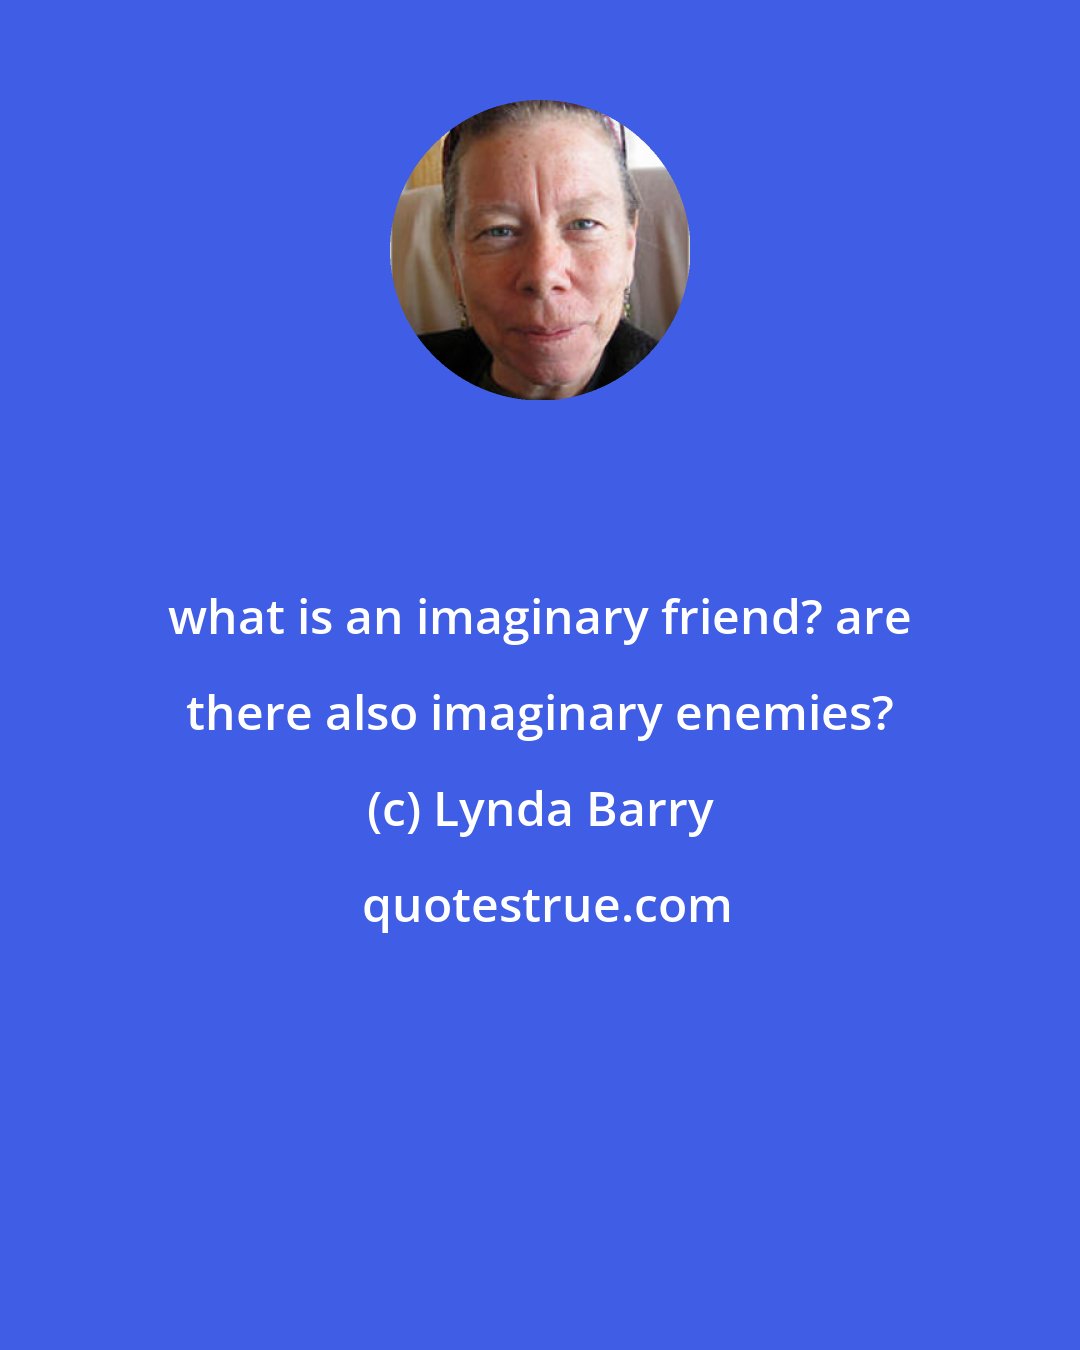 Lynda Barry: what is an imaginary friend? are there also imaginary enemies?